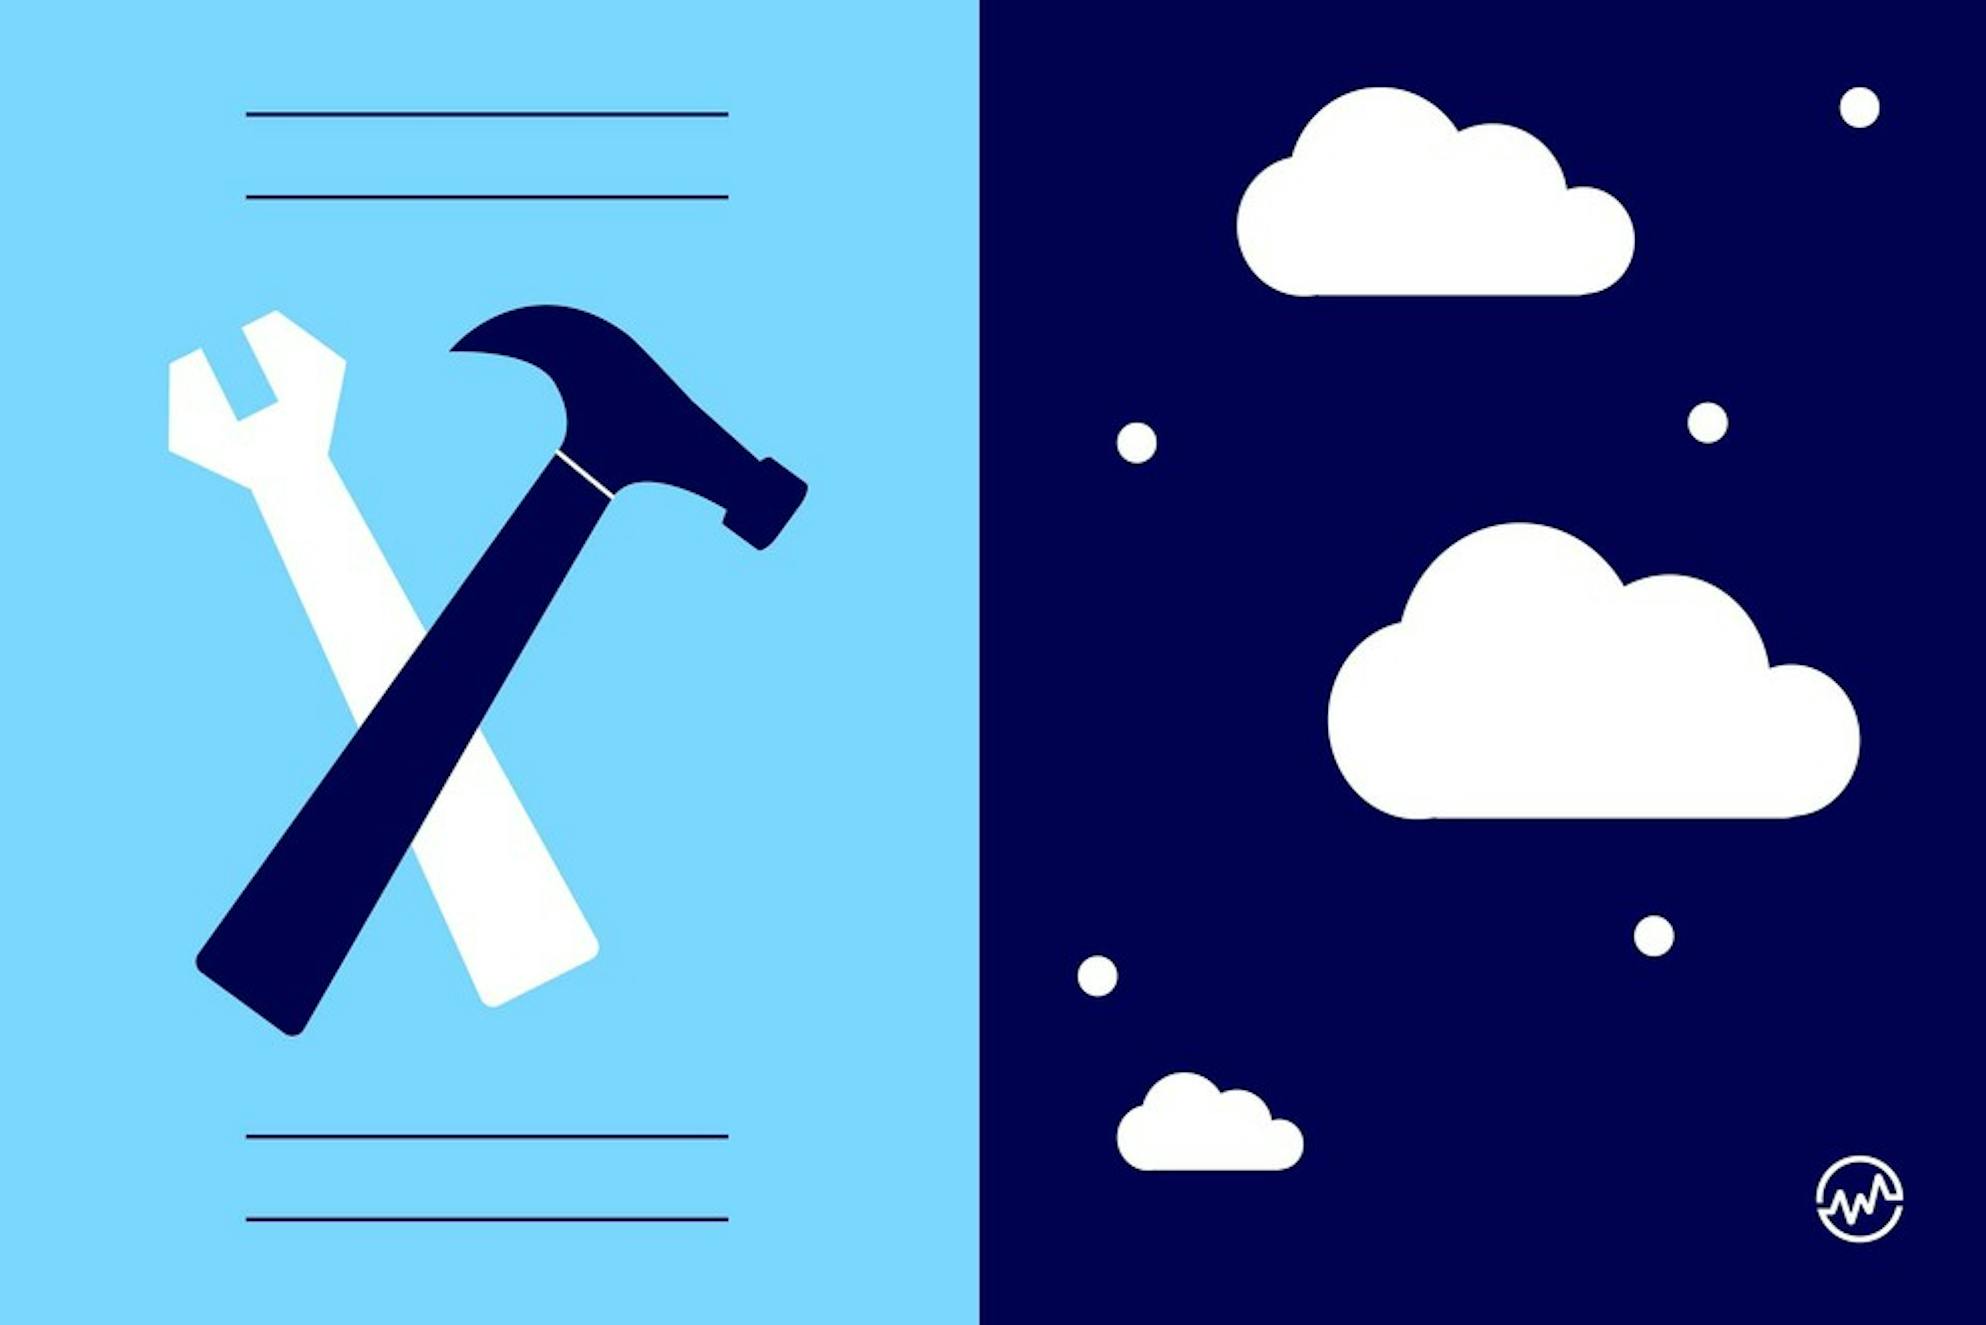 A hammer and wrench representing hard inquries and a night sky with clouds representing soft queries